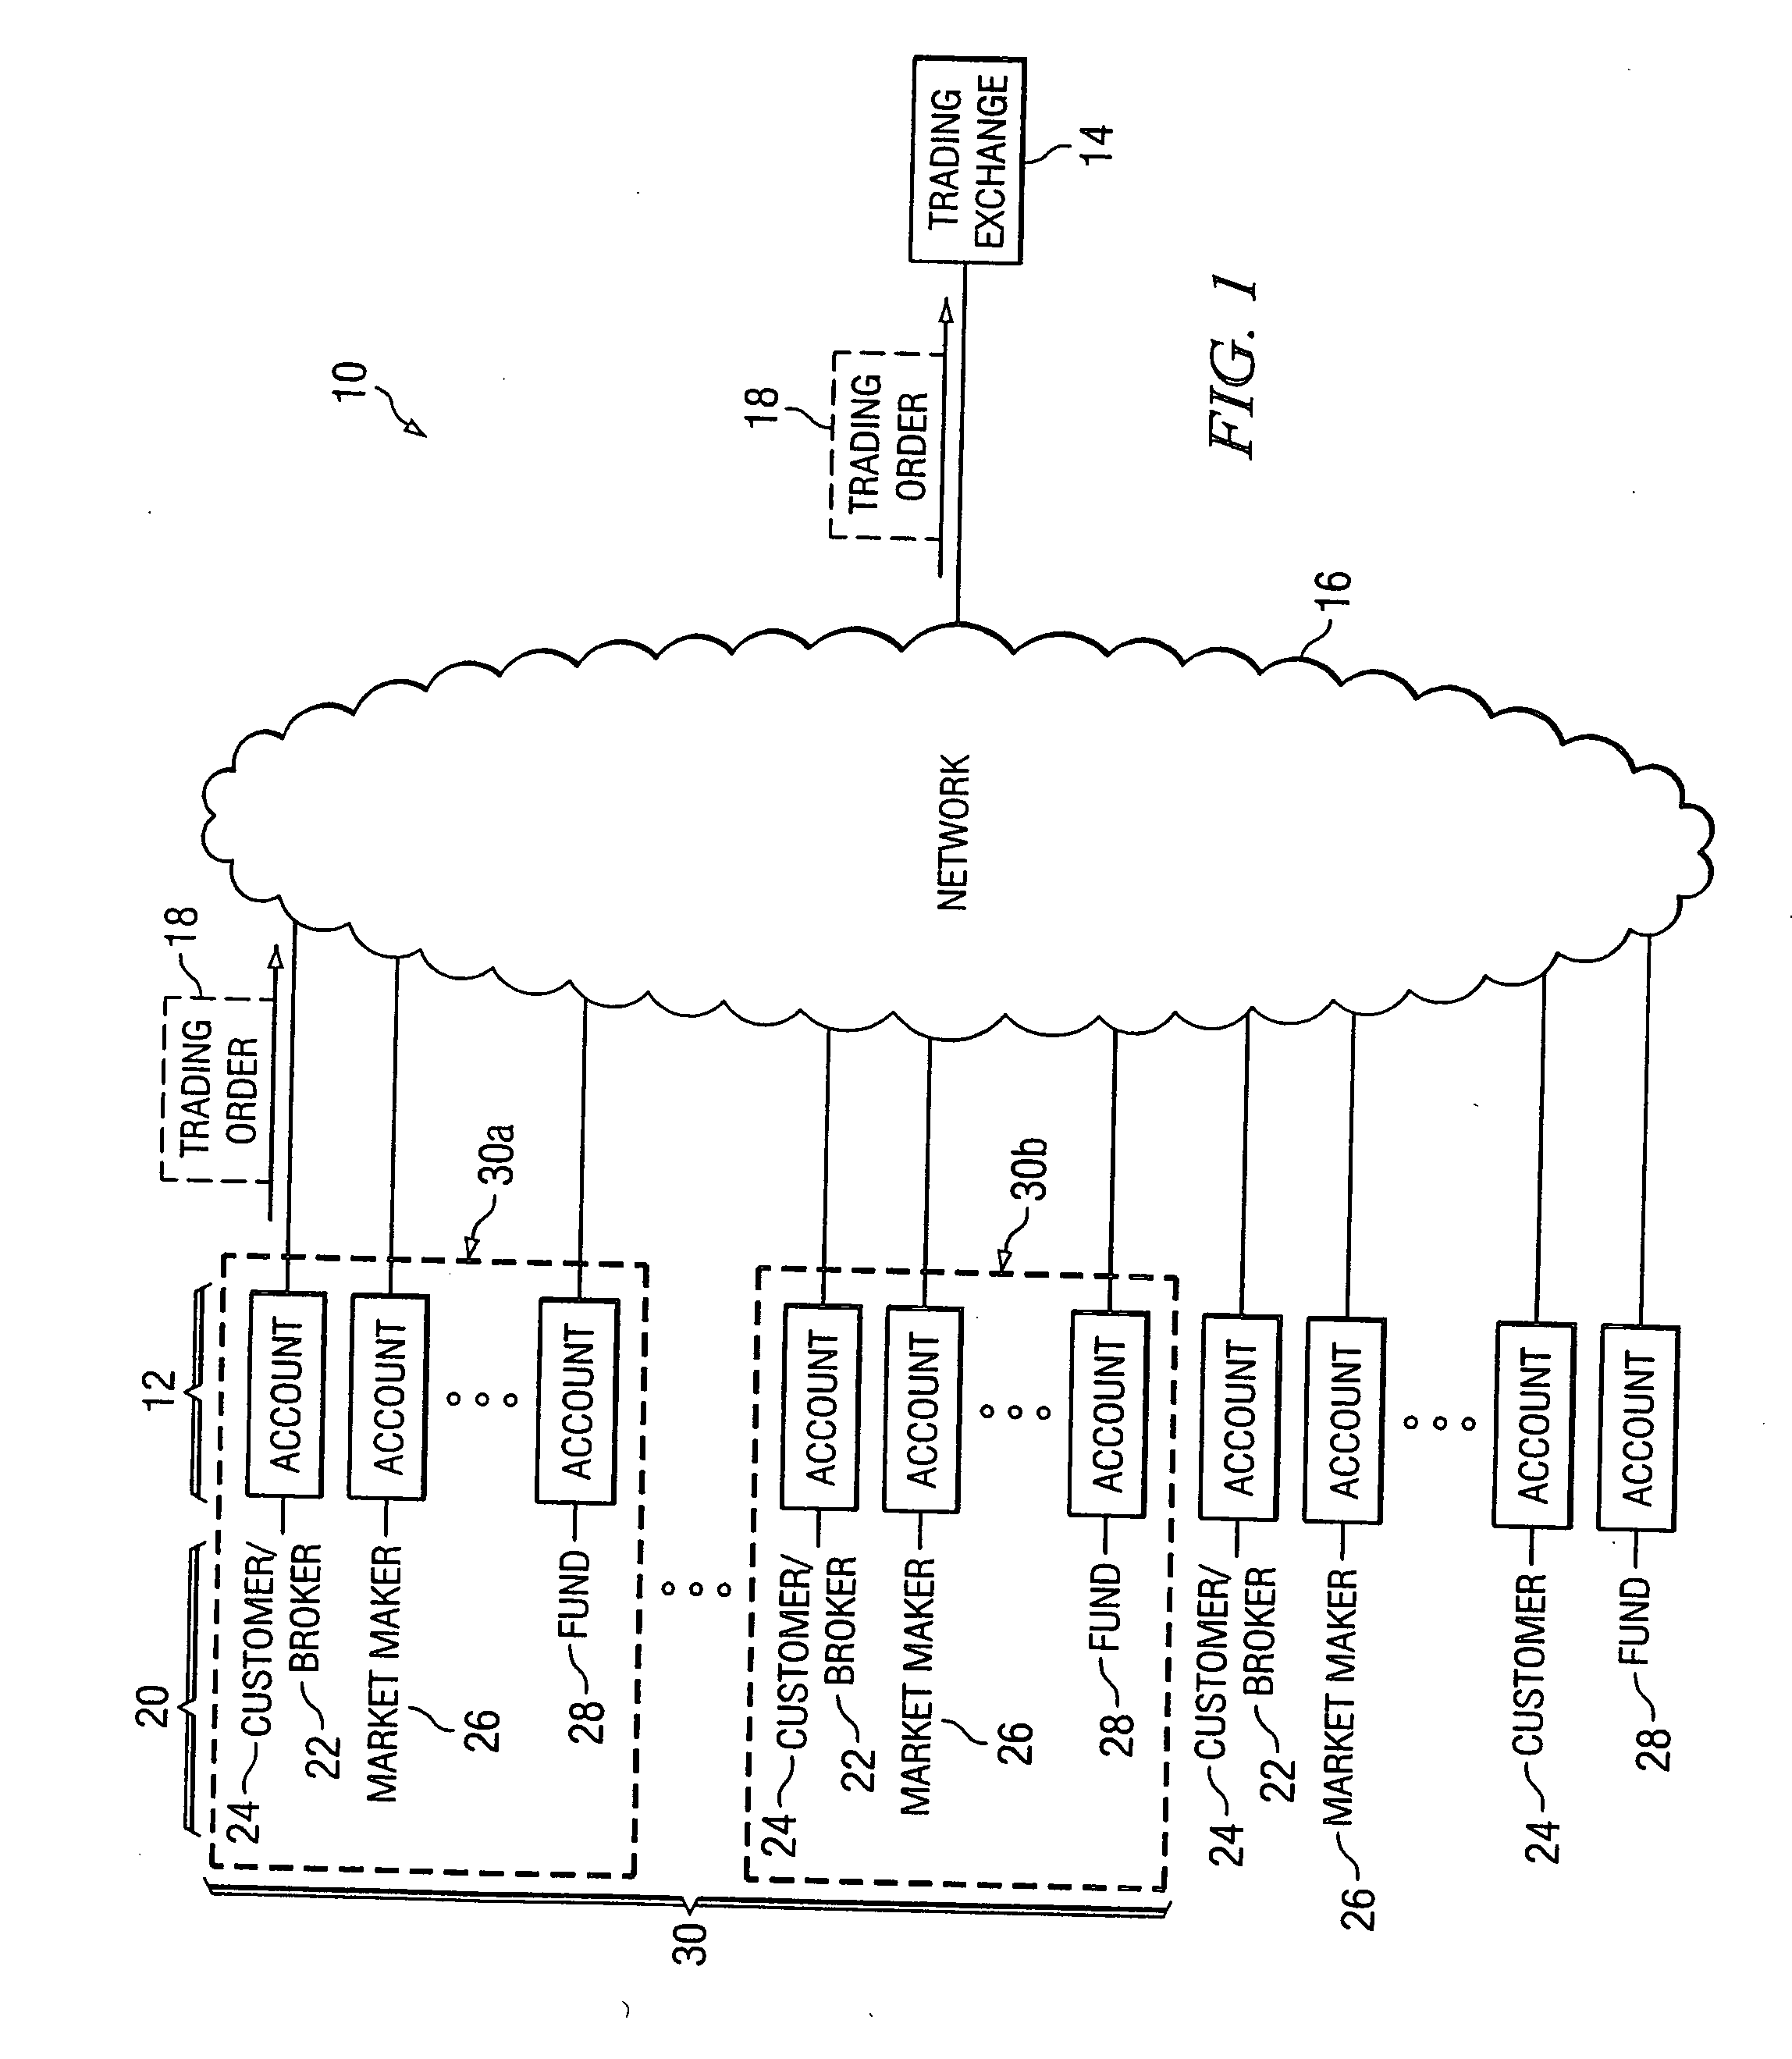 System and method for managing trading between related entities